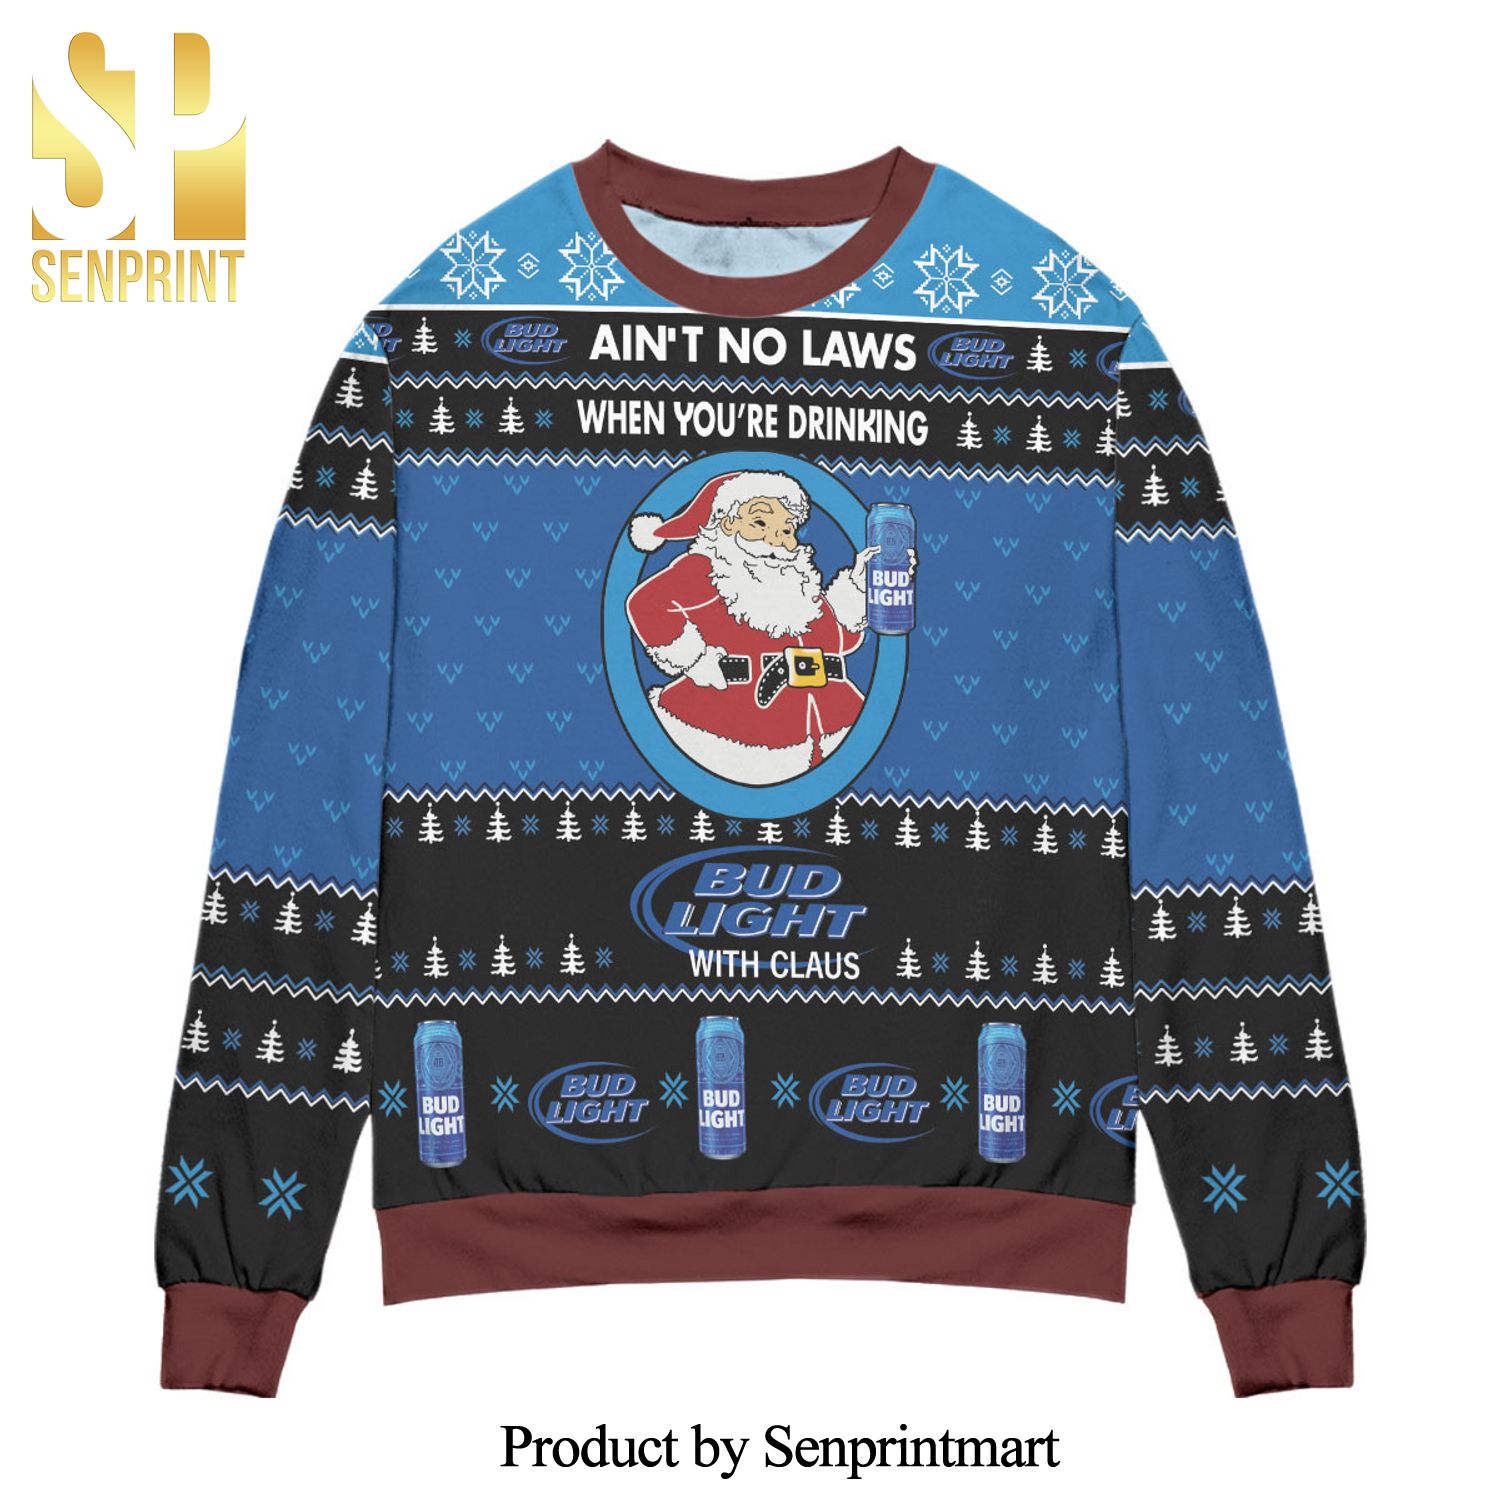 Ain’t No Laws When You’re Drinking Bud Light With Claus Knitted Ugly Christmas Sweater – Black Blue